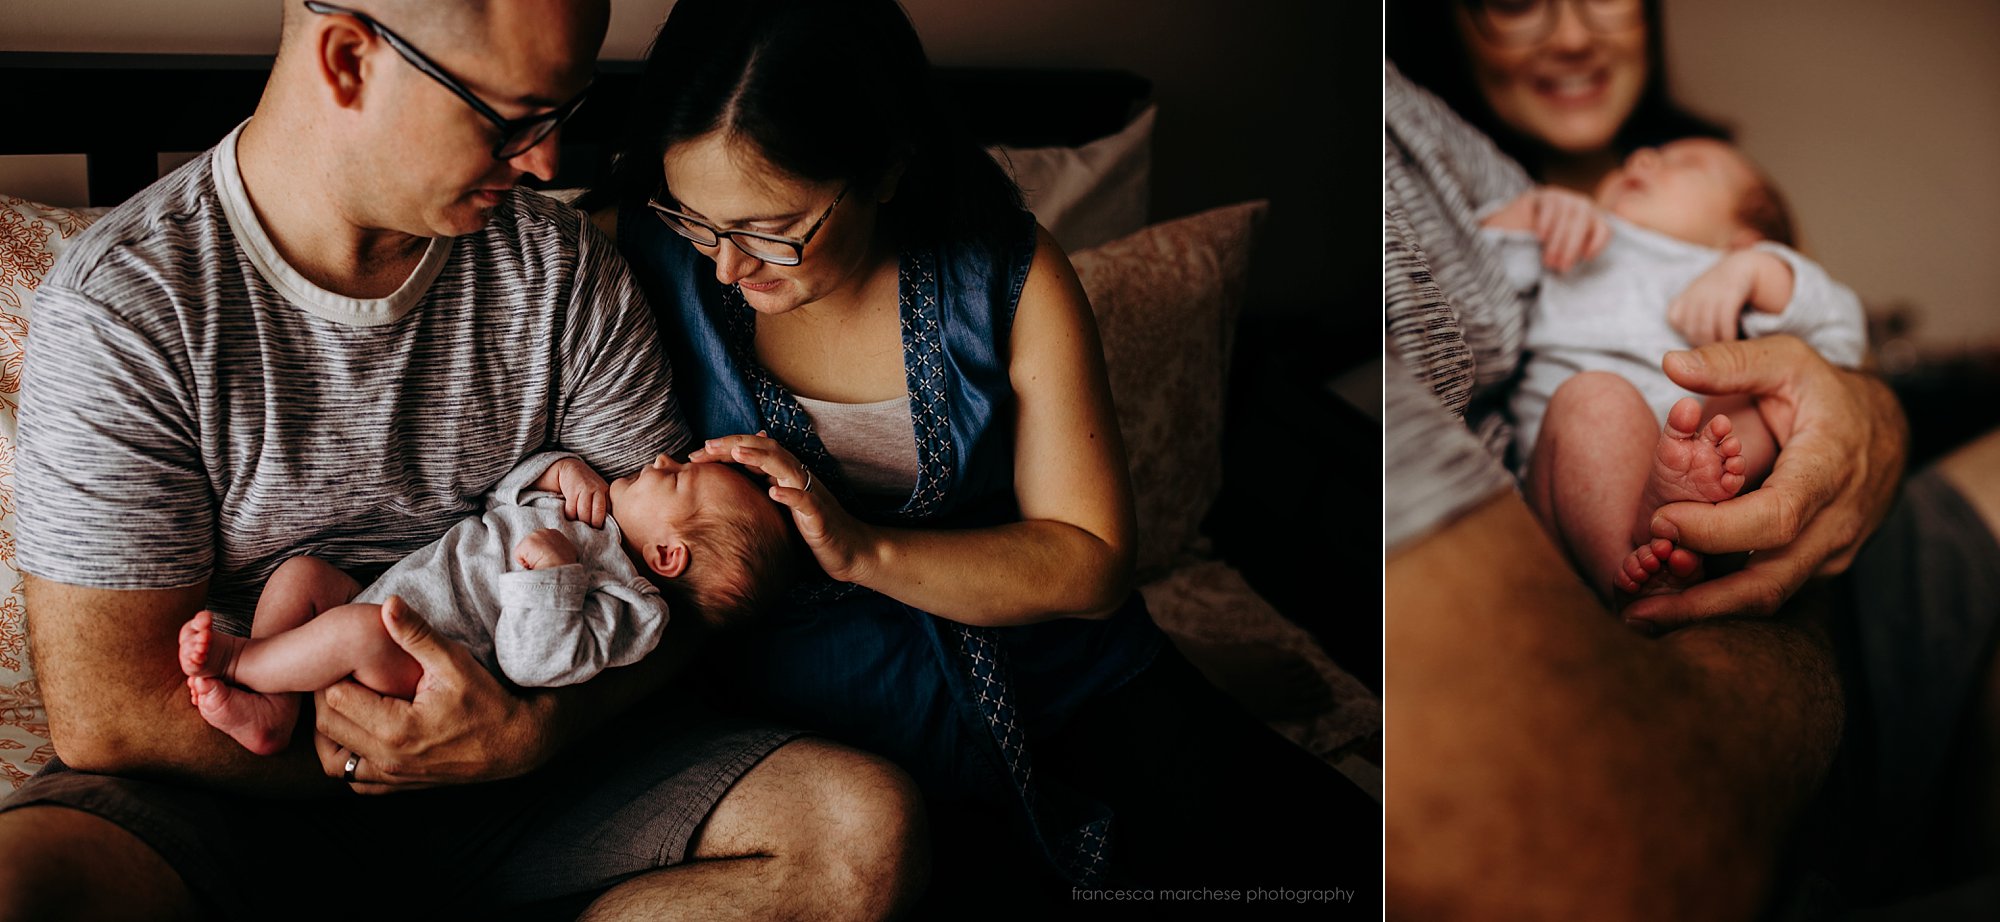 Francesca Marchese Photography lifestyle newborn photography session first time parents holding baby